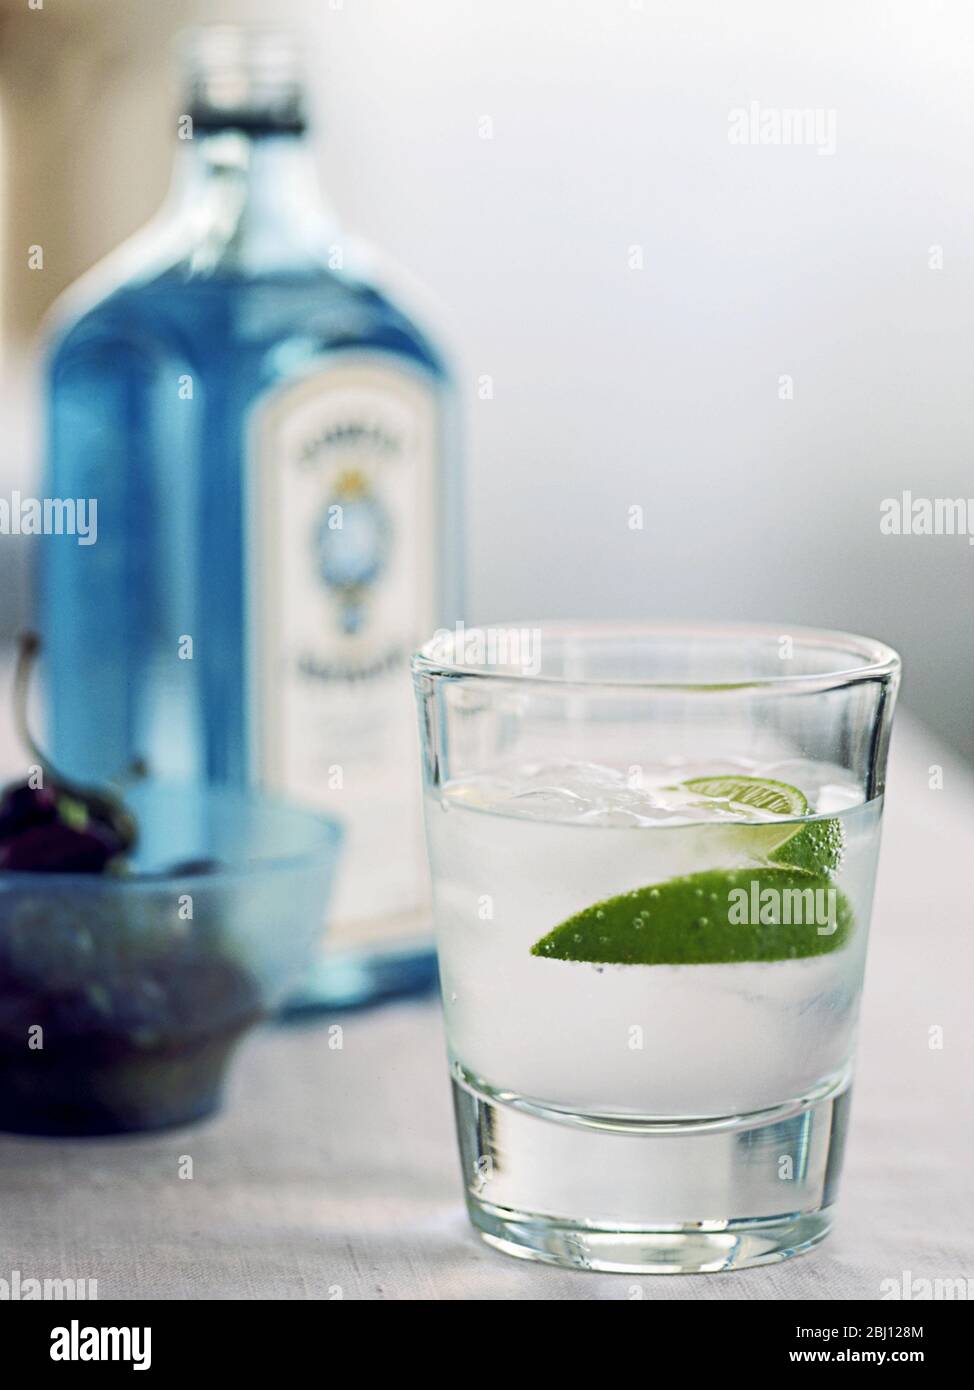 Glass of gin and tonic with lime segment and bottle of Bombay Sapphire in background - Stock Photo